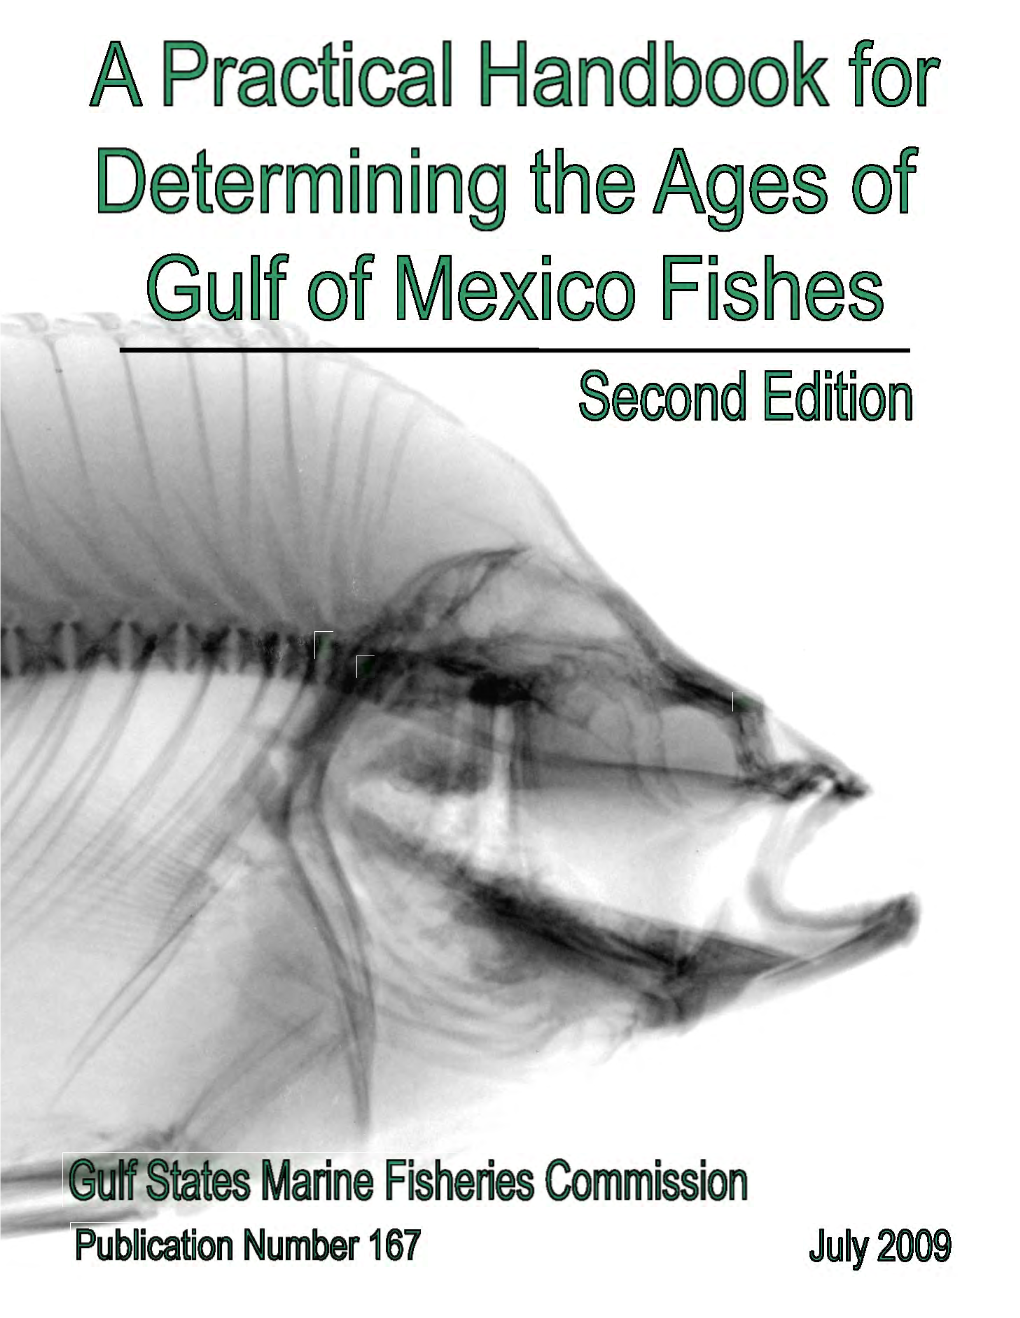 A Practical Handbook for Determining the Ages of Gulf of Mexico Fishes Second Edition